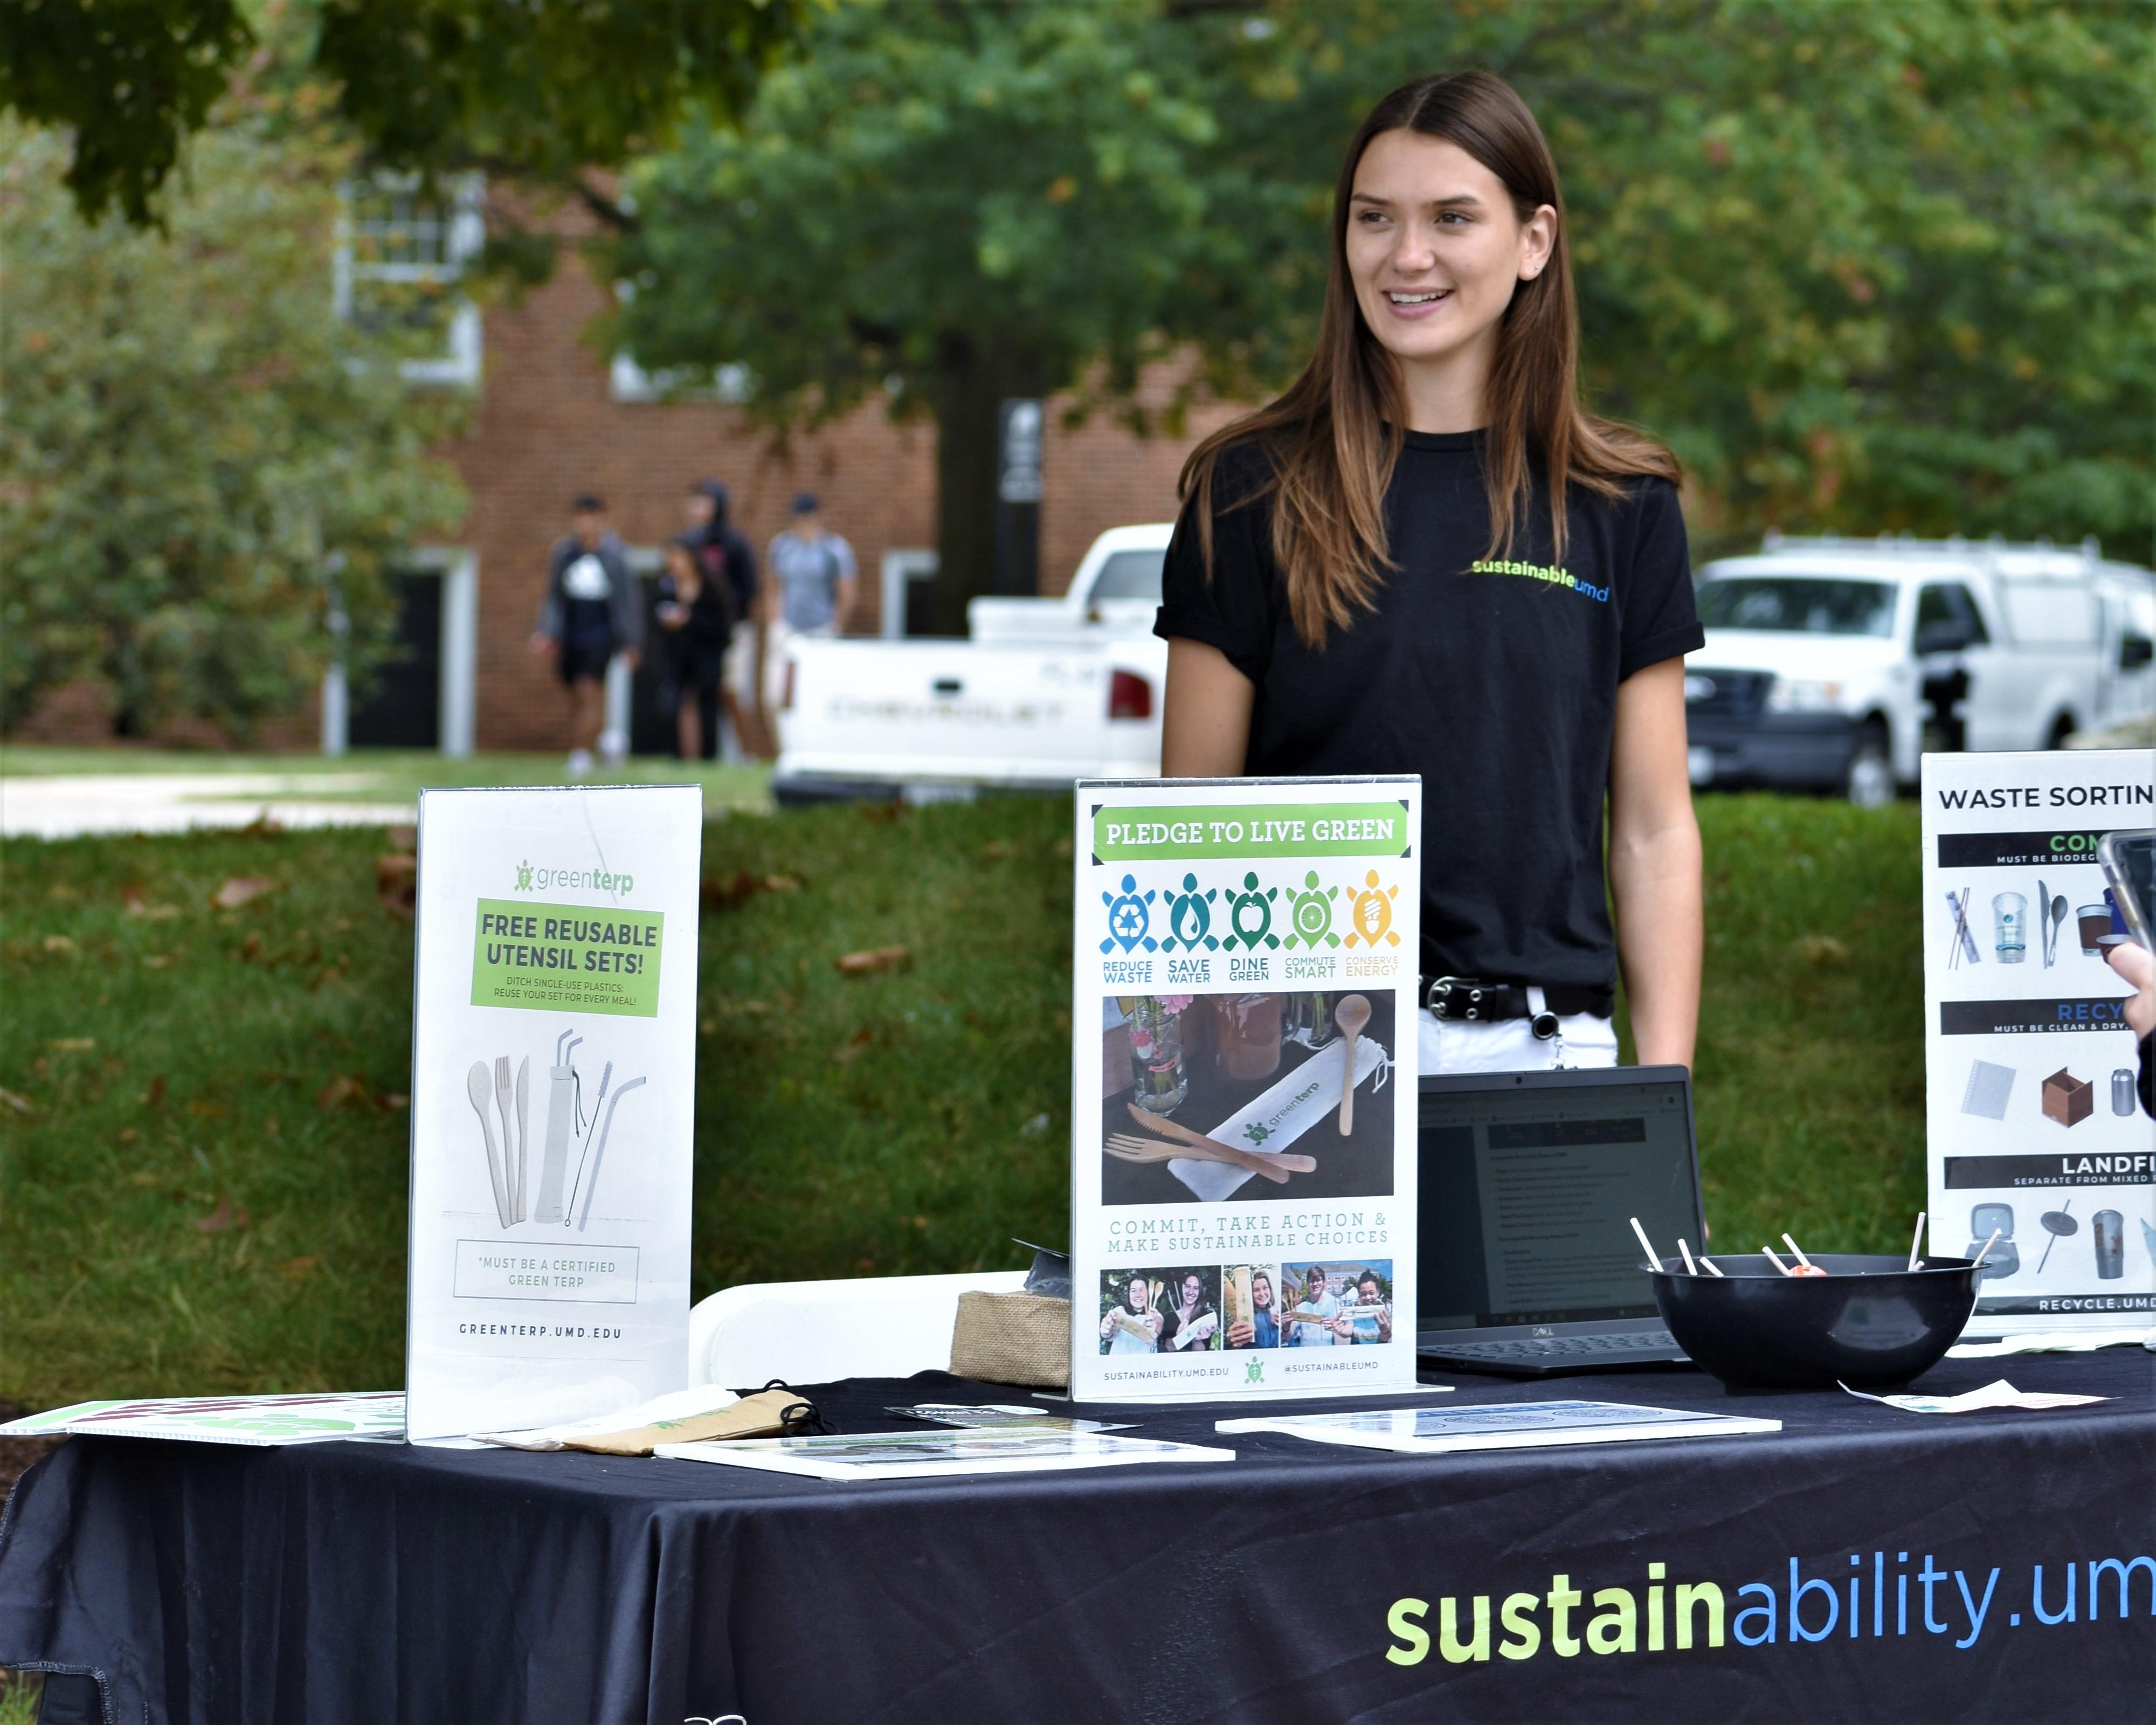 Outreach Team Tabling at the Farmers Market wearing SustainableUMD shirts